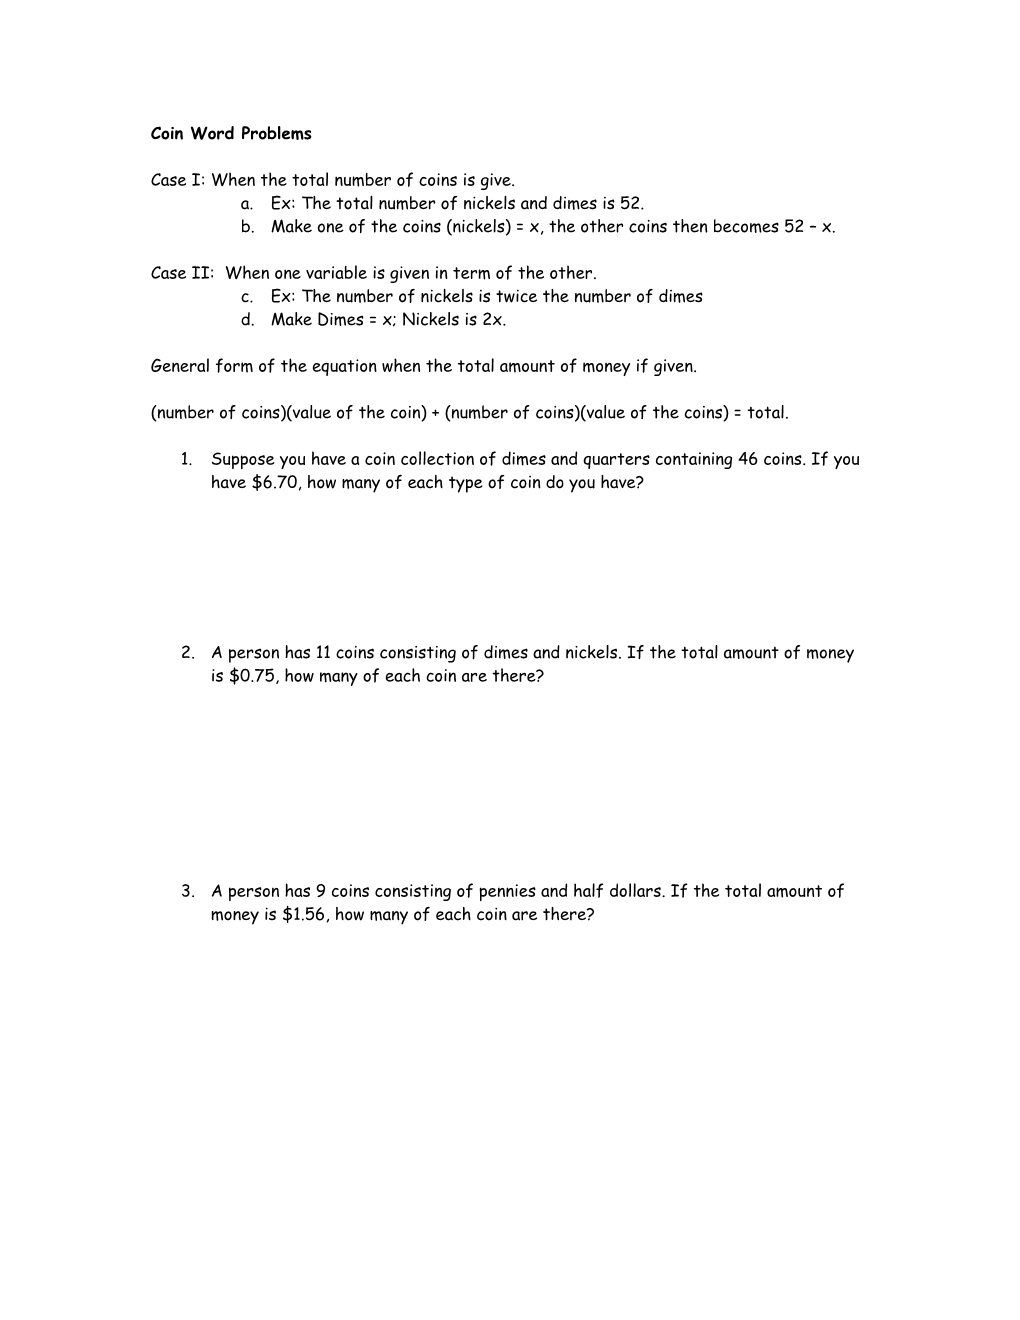 Coin Word Problems Using One Variable